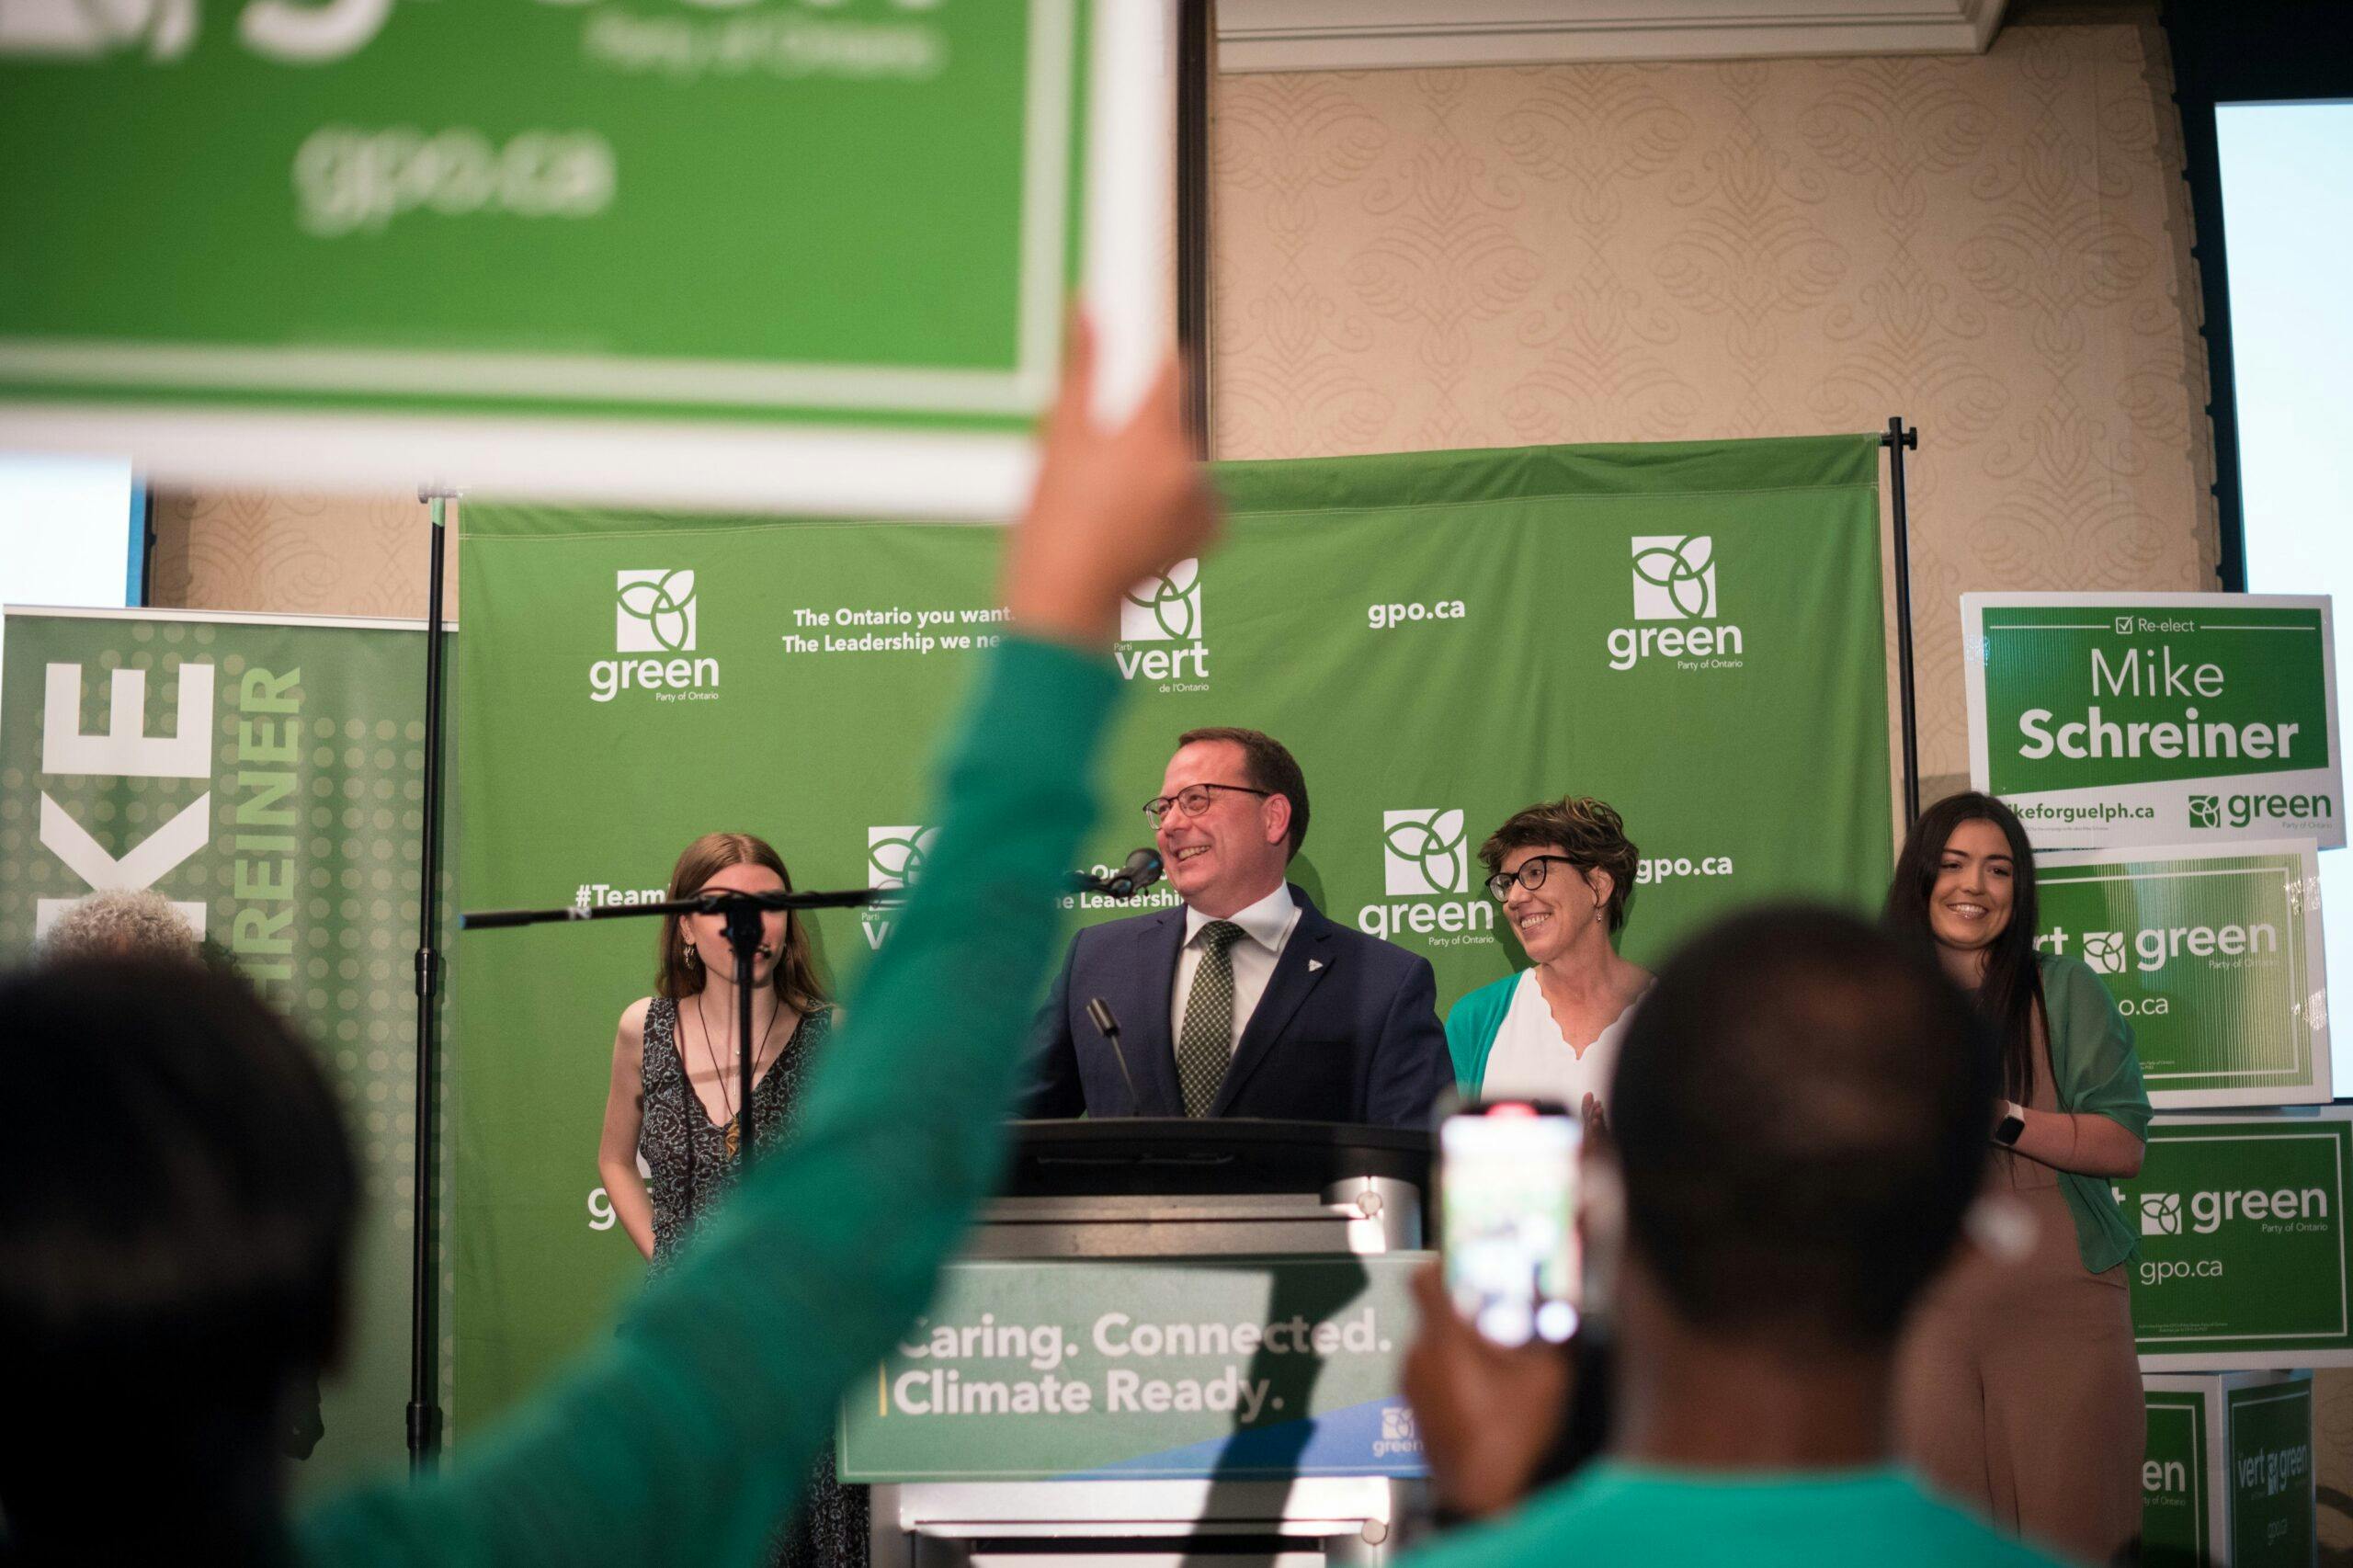 One is still the loneliest number for the Ontario Greens